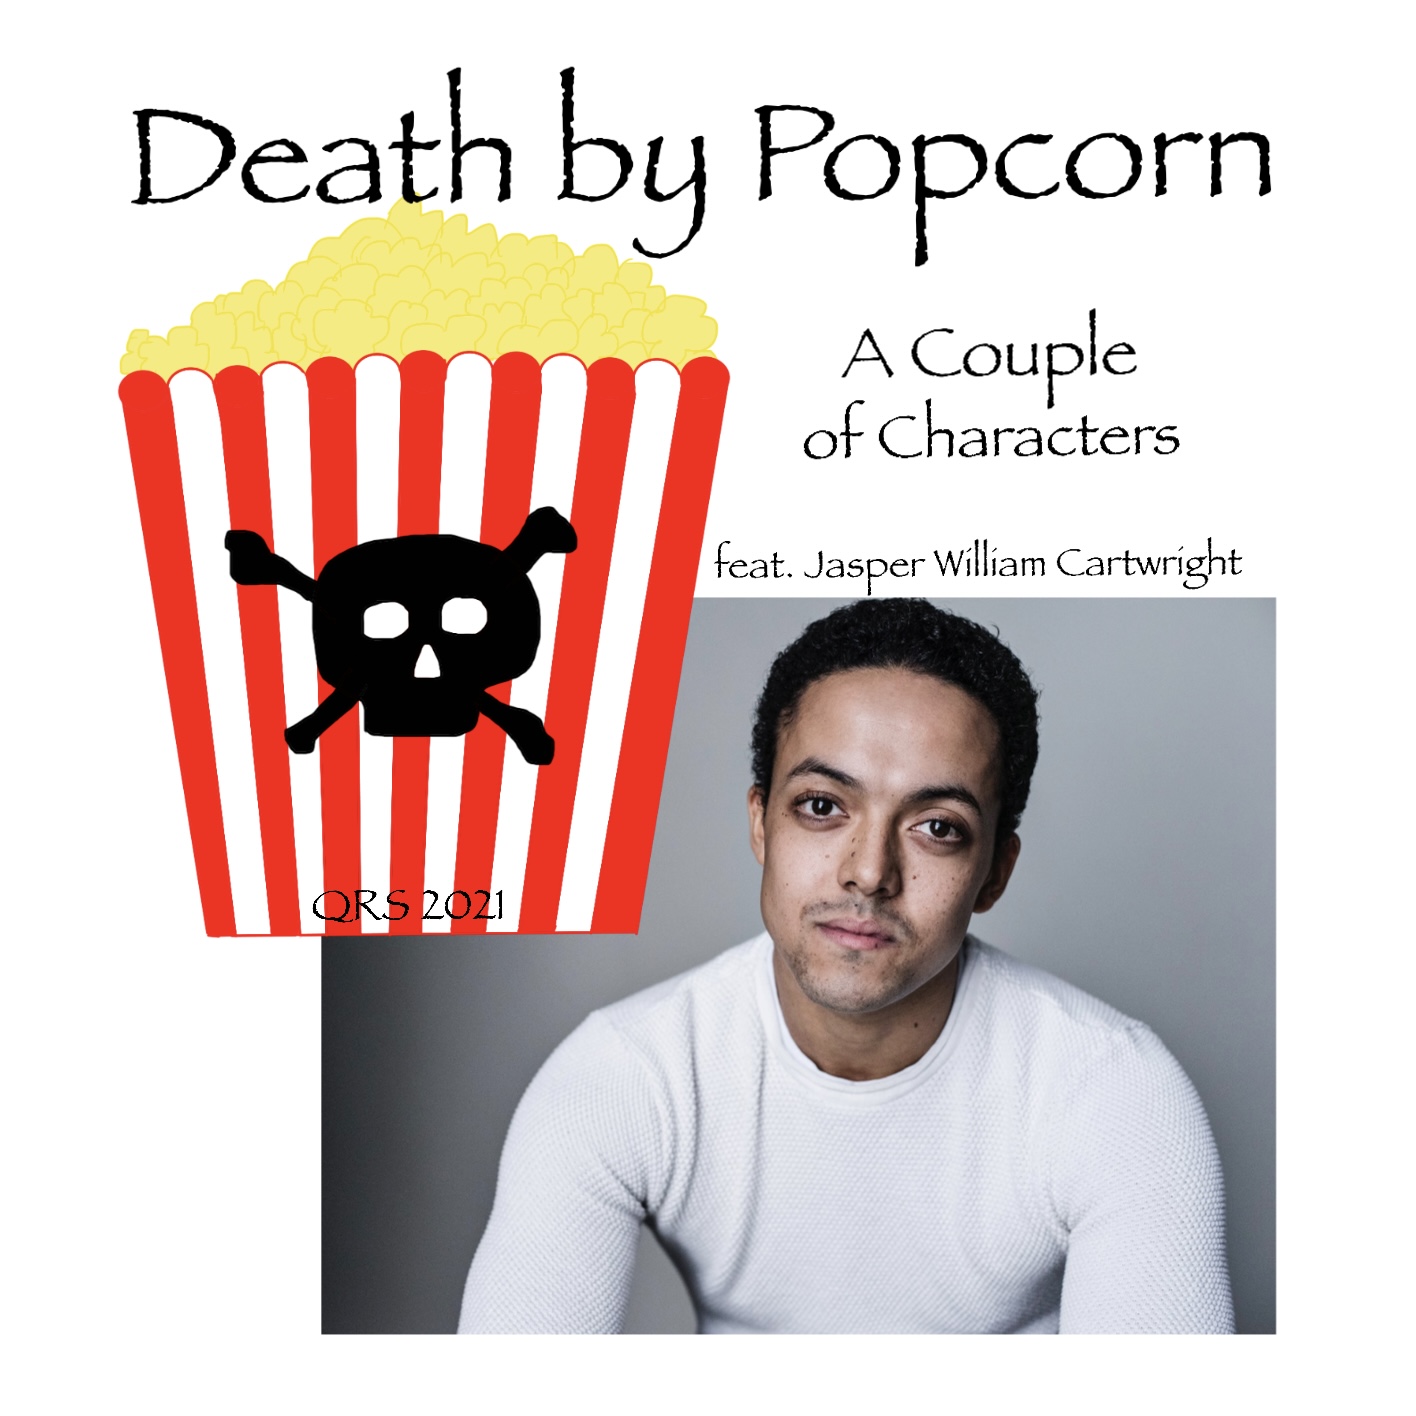 A red and white striped tub of popcorn is overlain on an image of a Black man with a serious expression on his face. A black skull and crossbones is on the side of the popcorn tub. Across the top reads: Death by Popcorn. Next to the popcorn reads: A Couple of Characters. Above the image of the man are words reading: featuring Jasper William Cartwright.